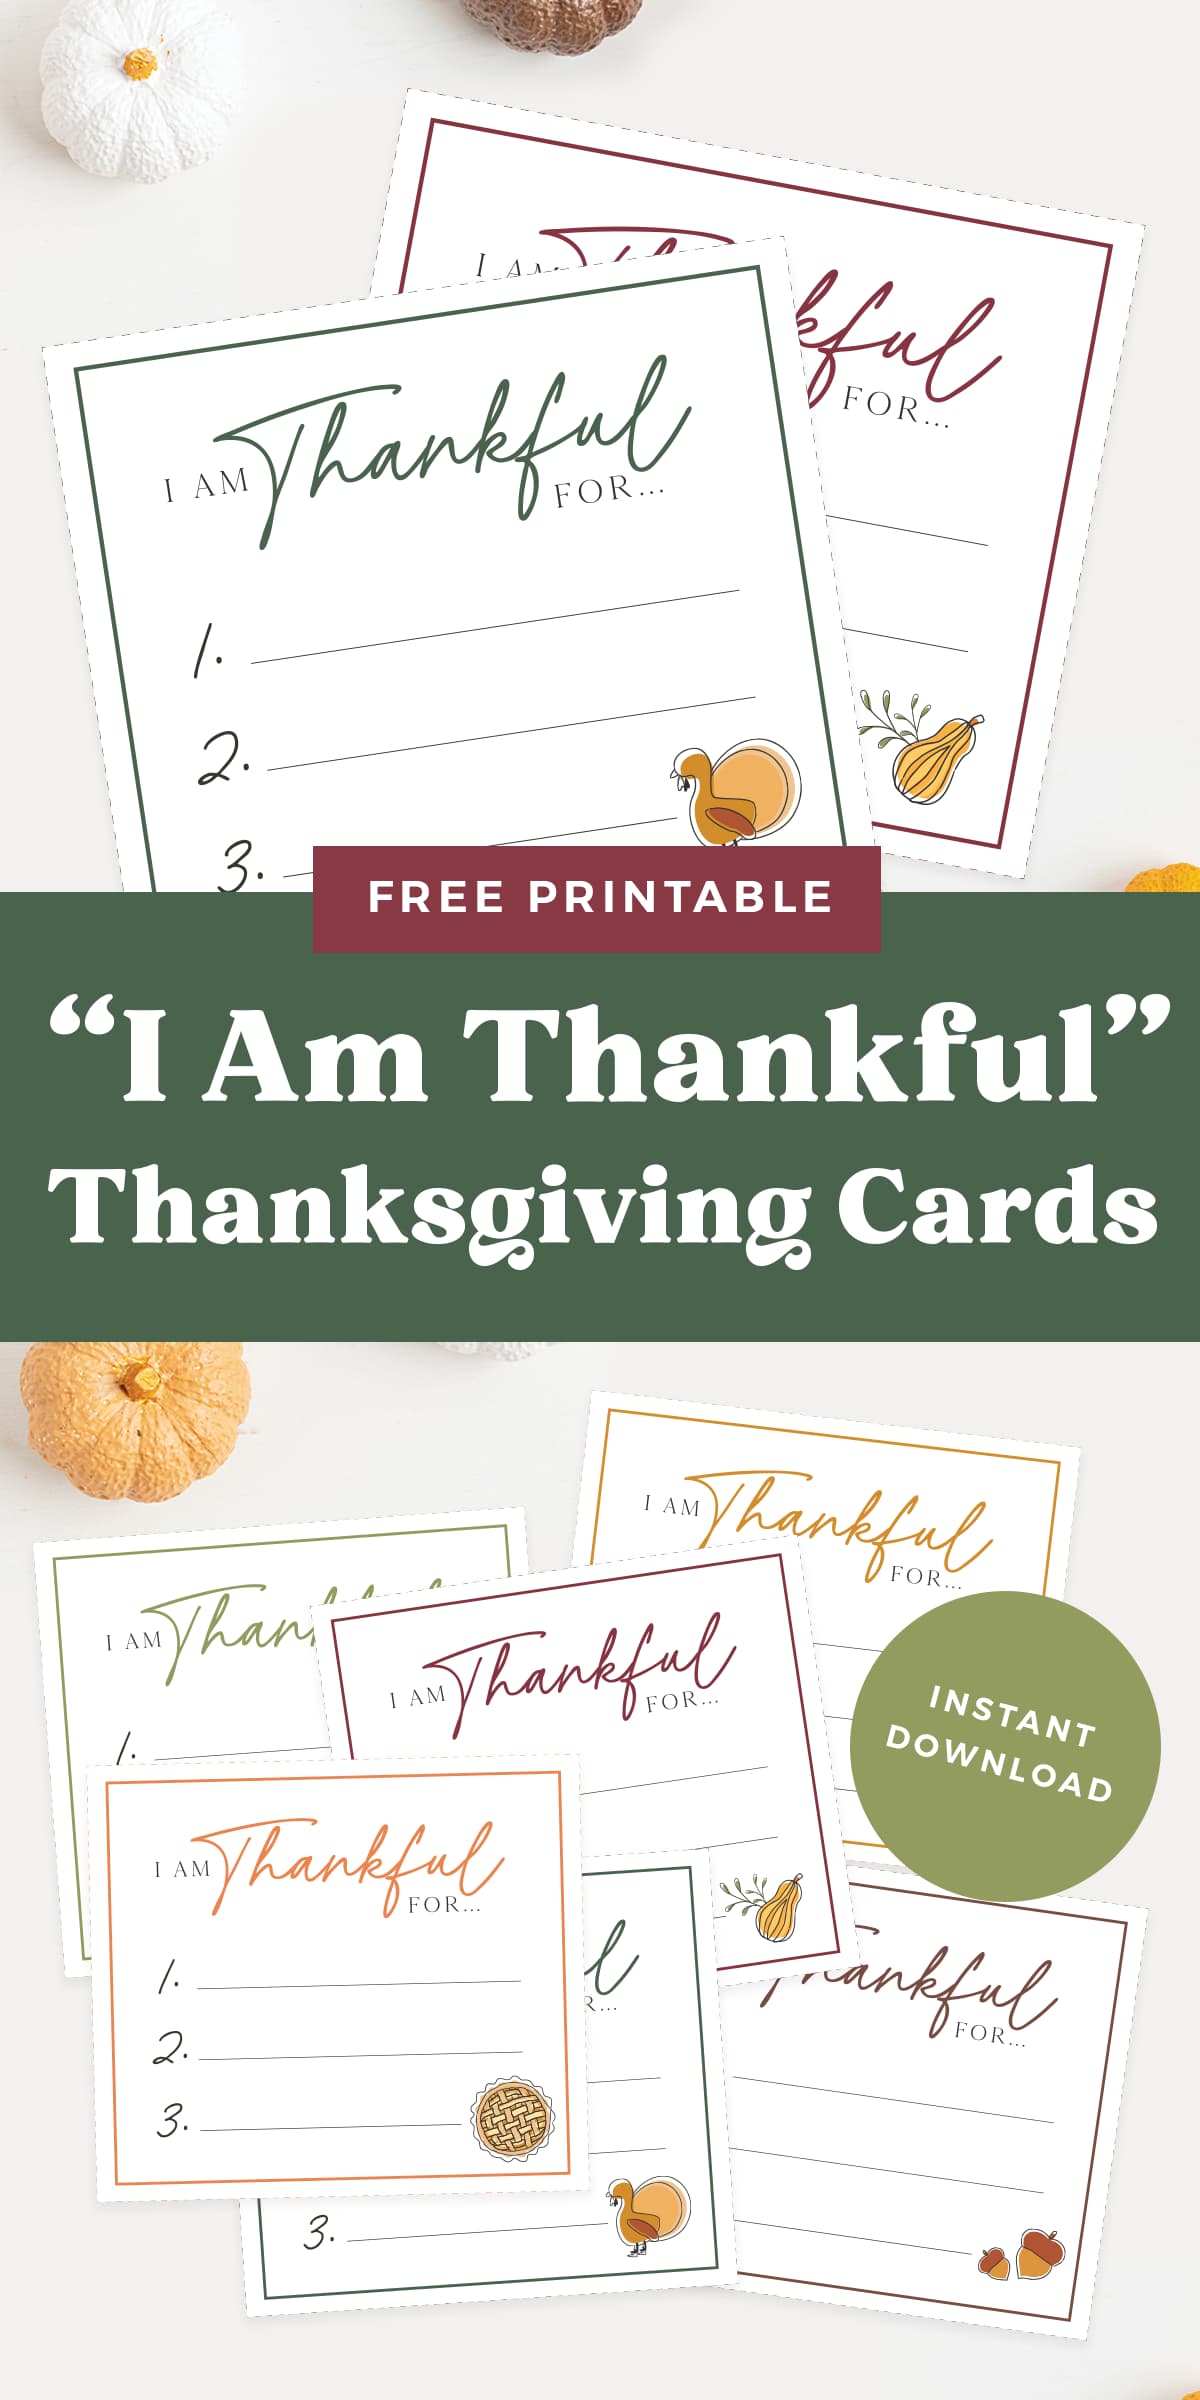 I Am Thankful For Cards, free printable for the holidays! - Favorite ...